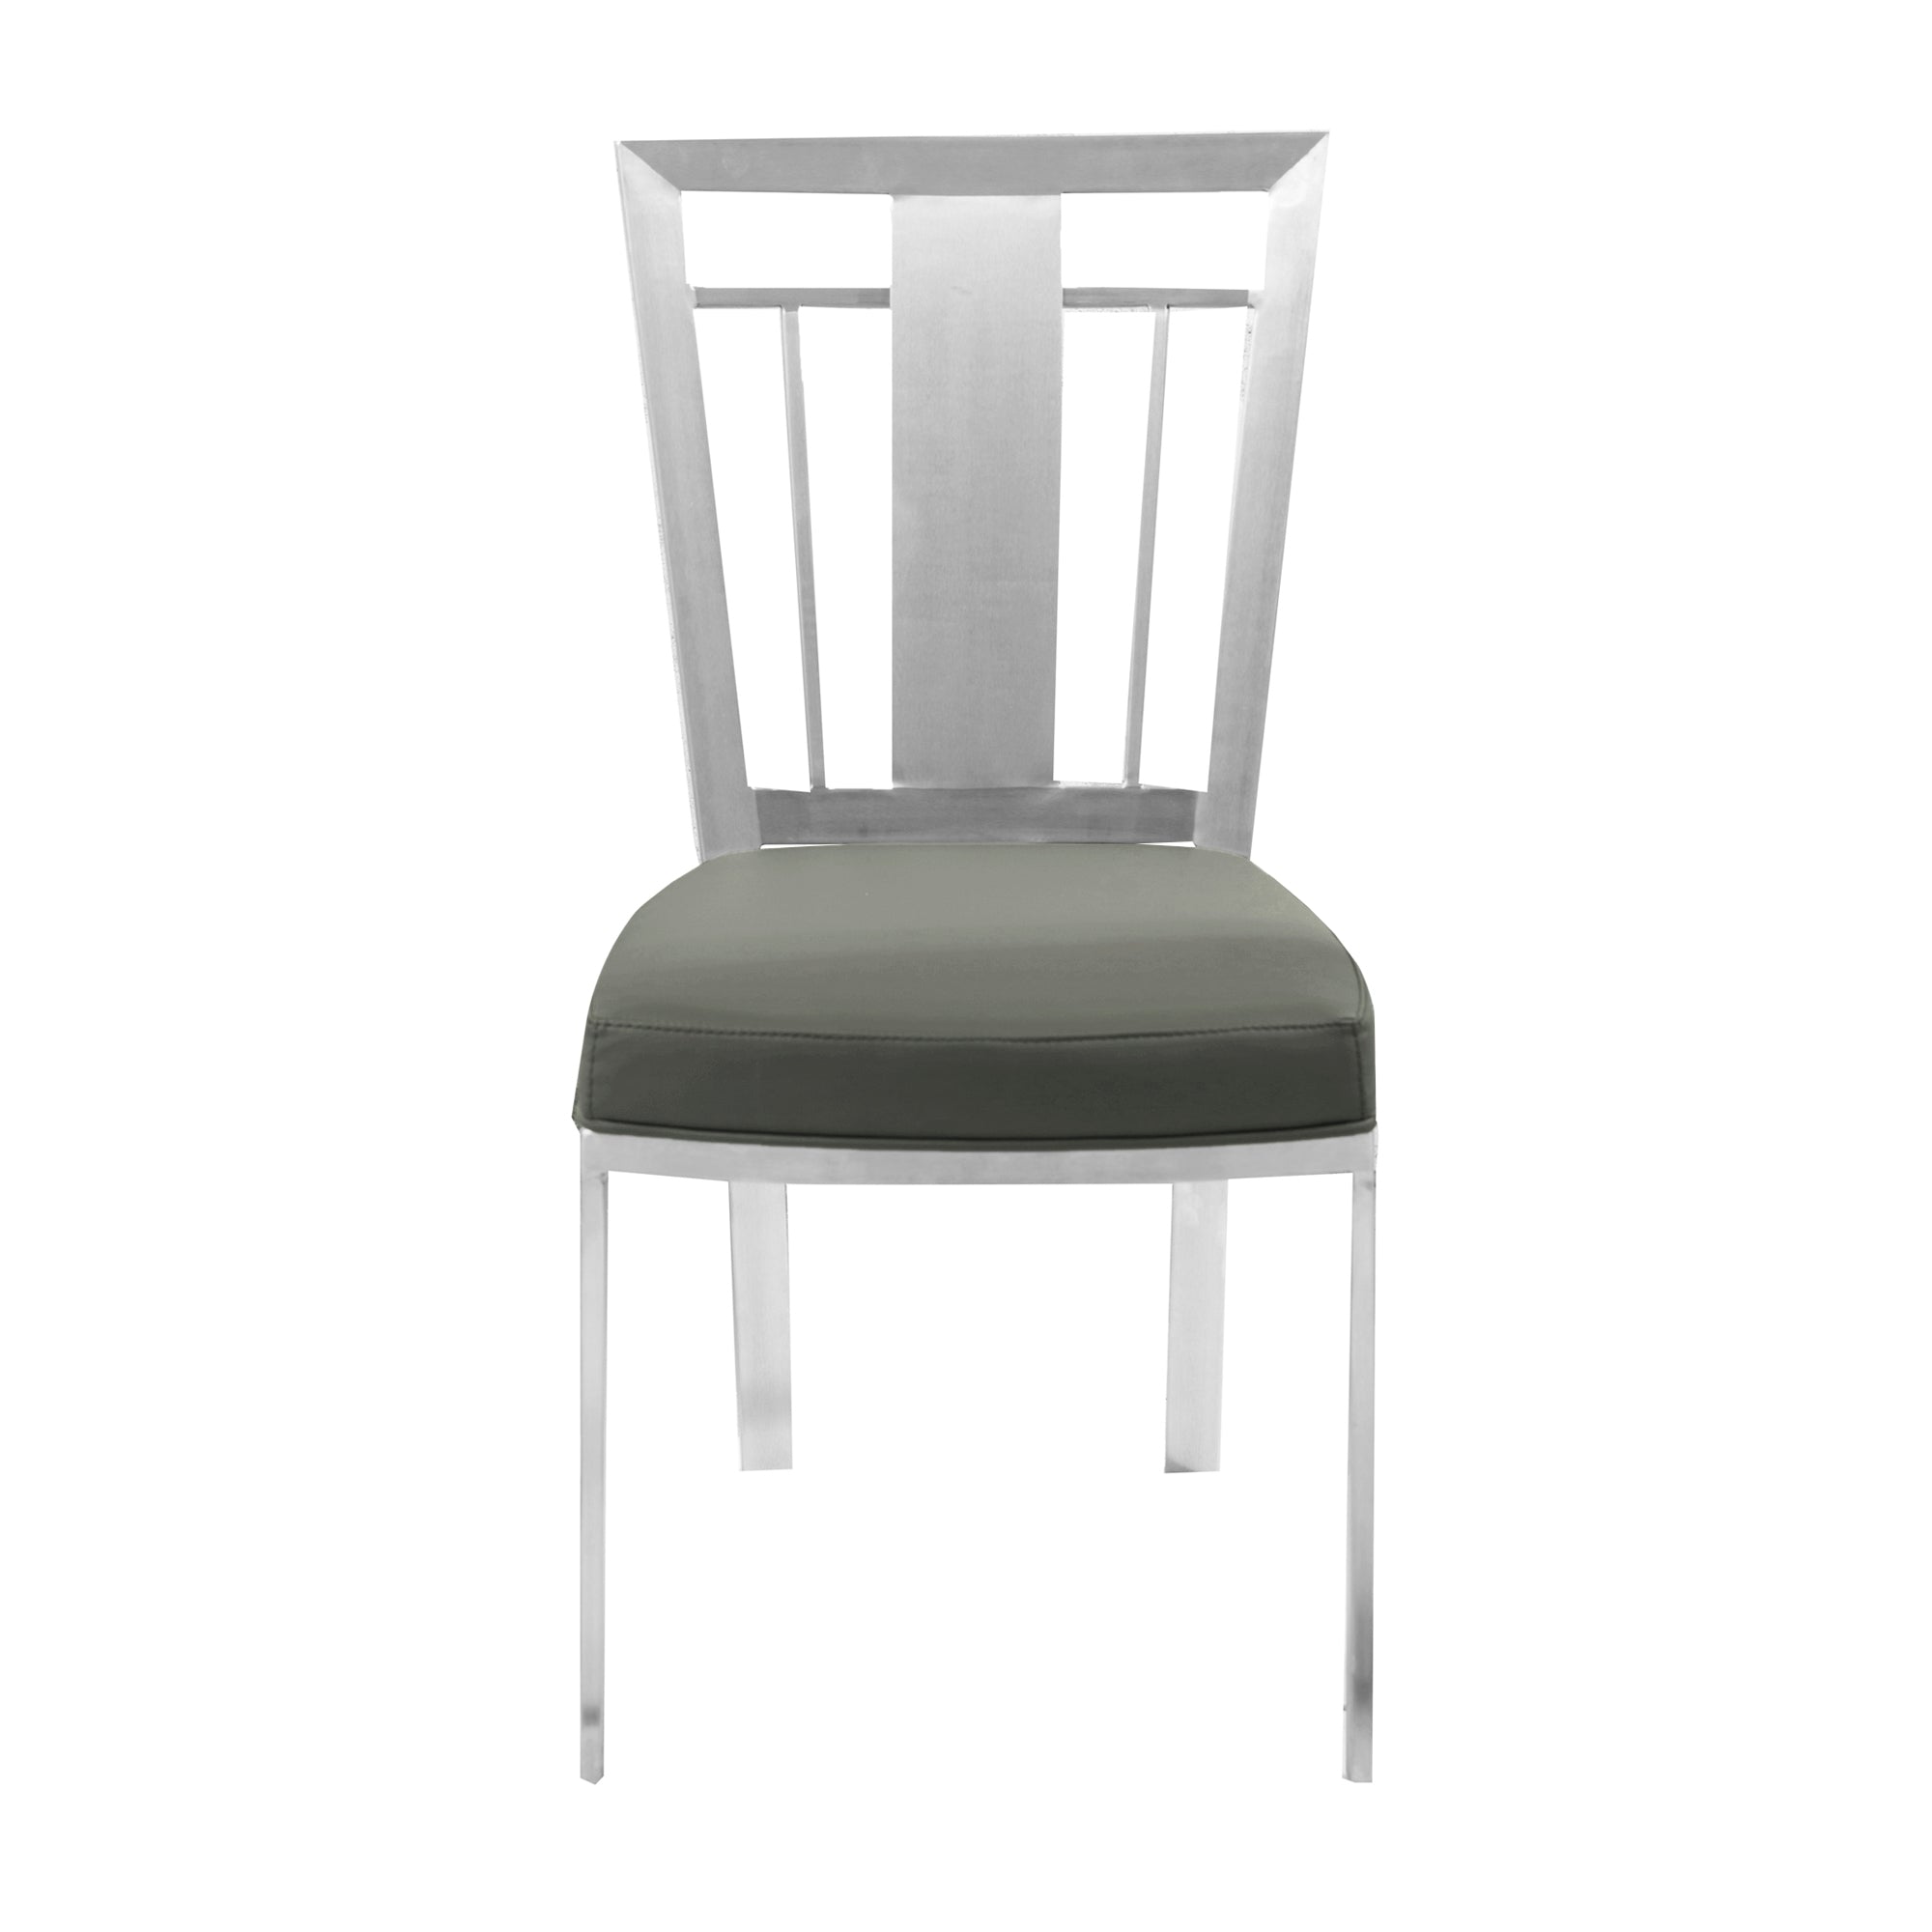 Armen Living Cleo Dining Accent Chairs-Set of 2, 36" x 18" x 22", Grey